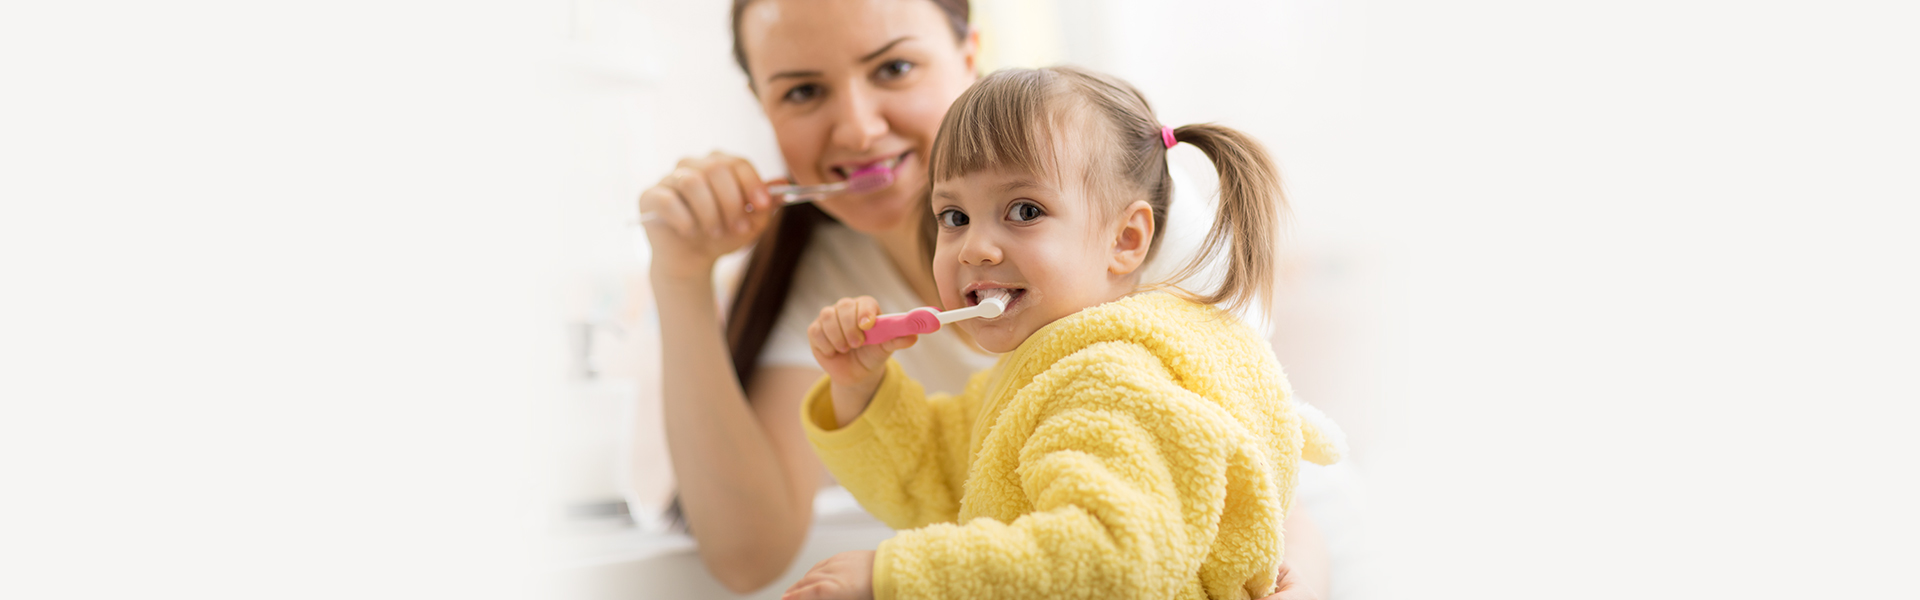 Dental Cleaning & Exams in Greenwood, SC